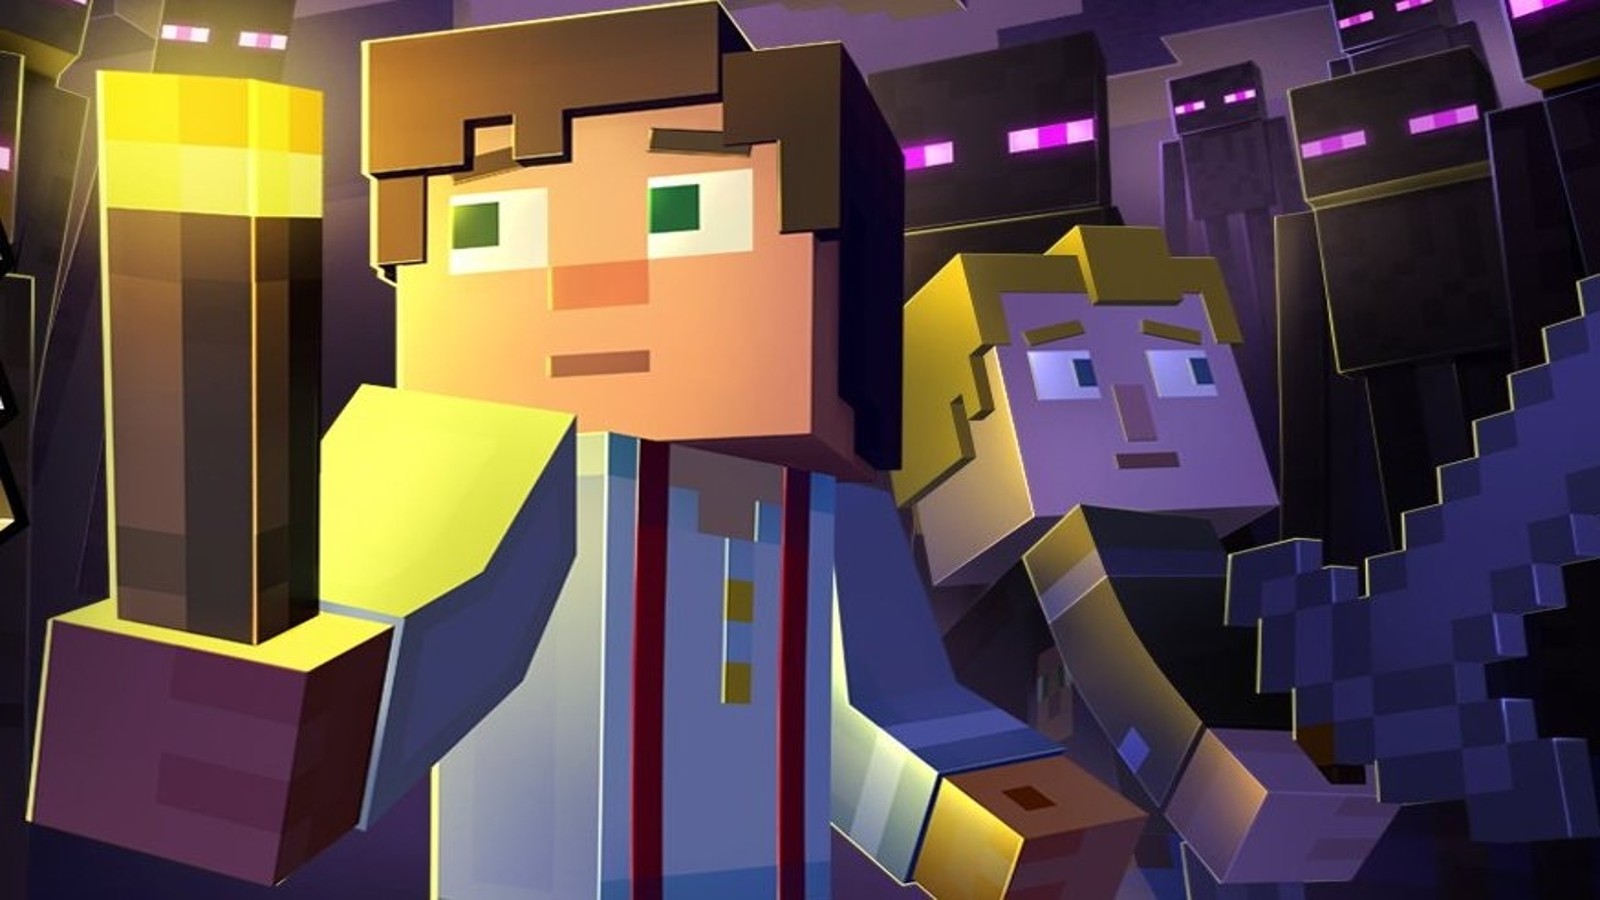 Minecraft: Story Mode Android App in the Google Play Store